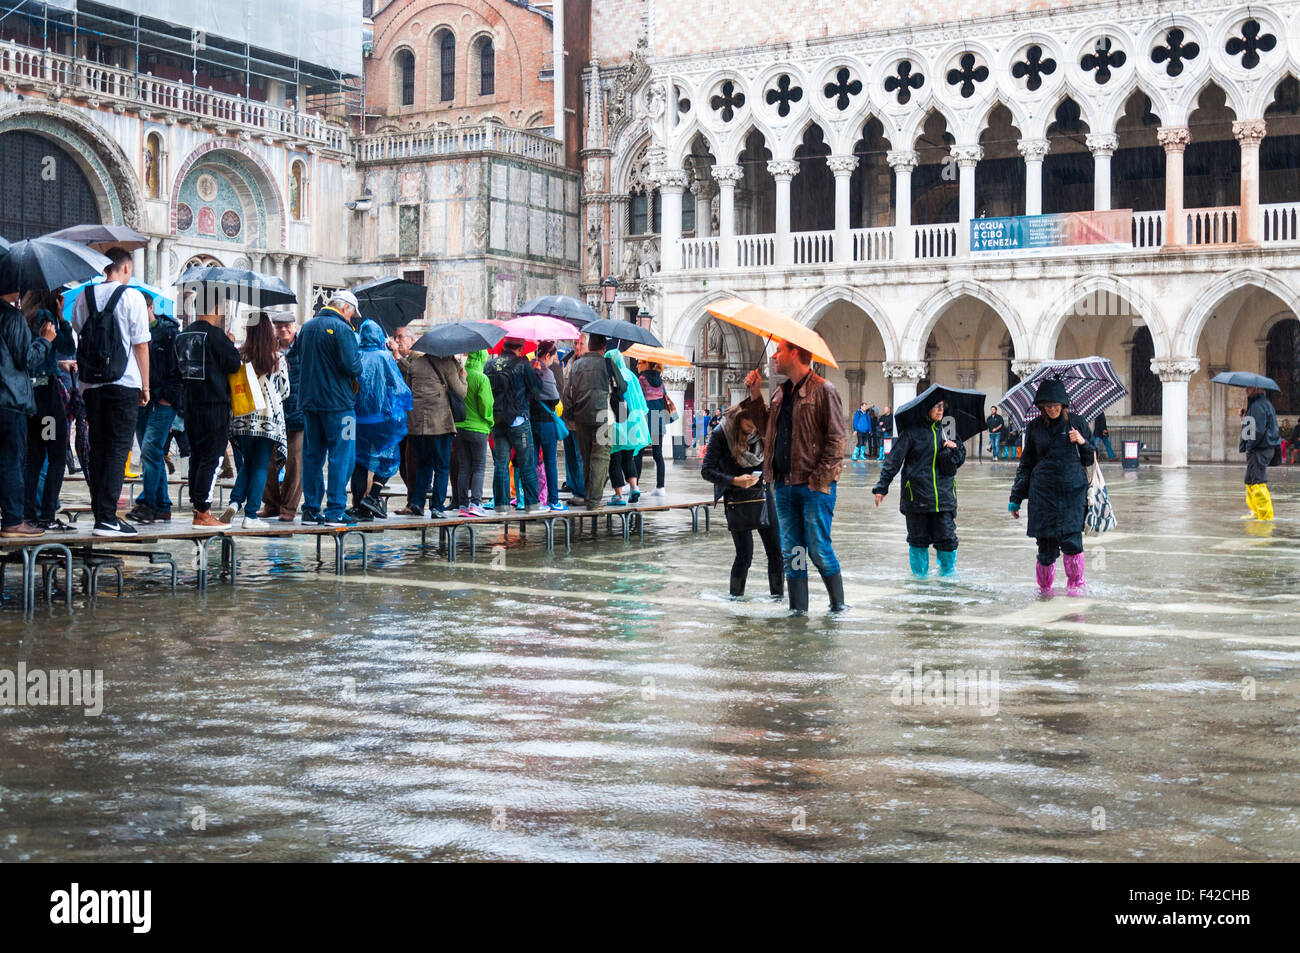 St Marks Square, Venice, Italy. 14th October 2015.People in Piazza San Marco in the rain during Acqua alta or 'high water' the exceptional tide peaks that occur periodically in the northern Adriatic Sea. Photo by:Richard Wayman Stock Photo